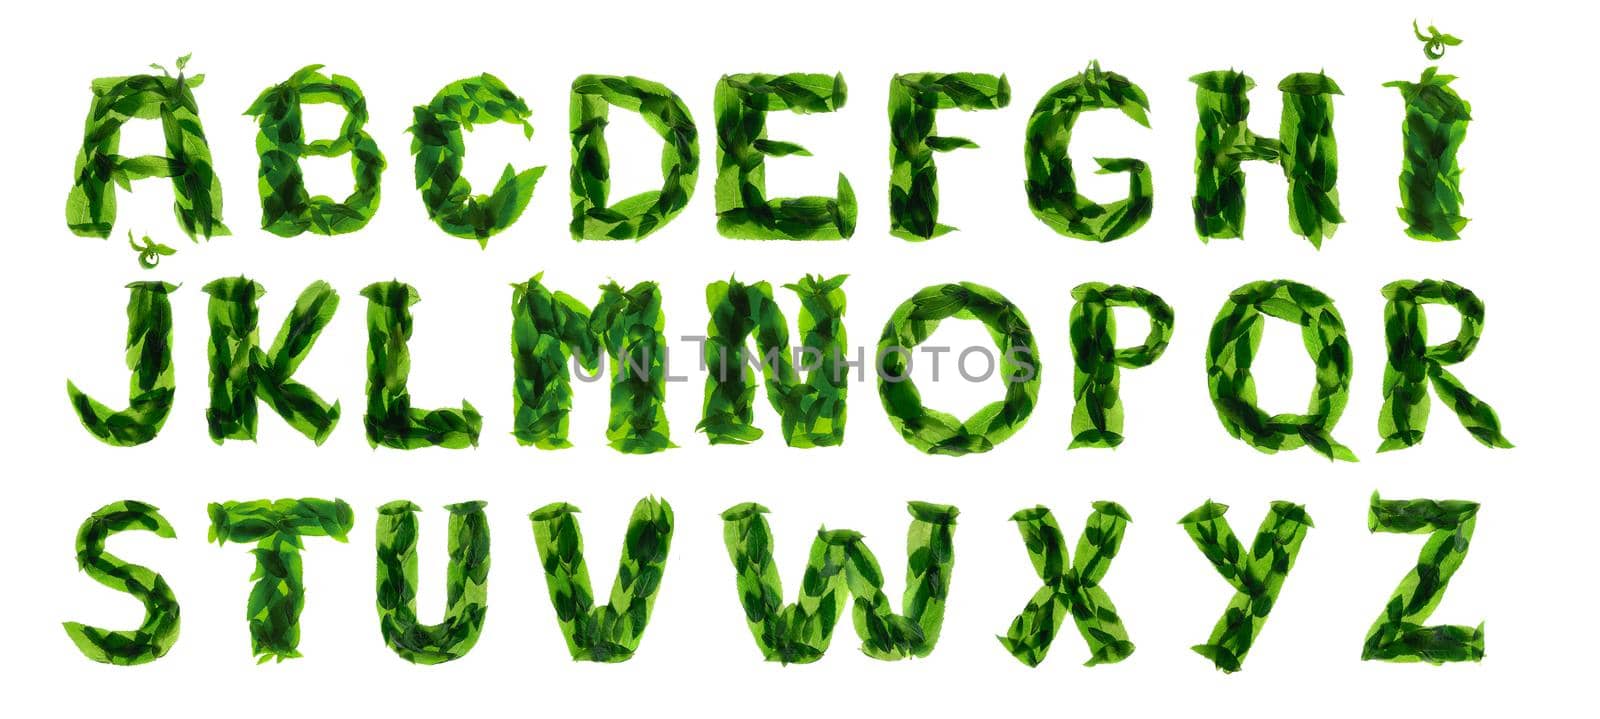 English alphabet, made of a mint leaves. Ingredient for cocktails, desserts and other dishes. Isolated on white background. Concept: design, logo, word, text, title, illustration.